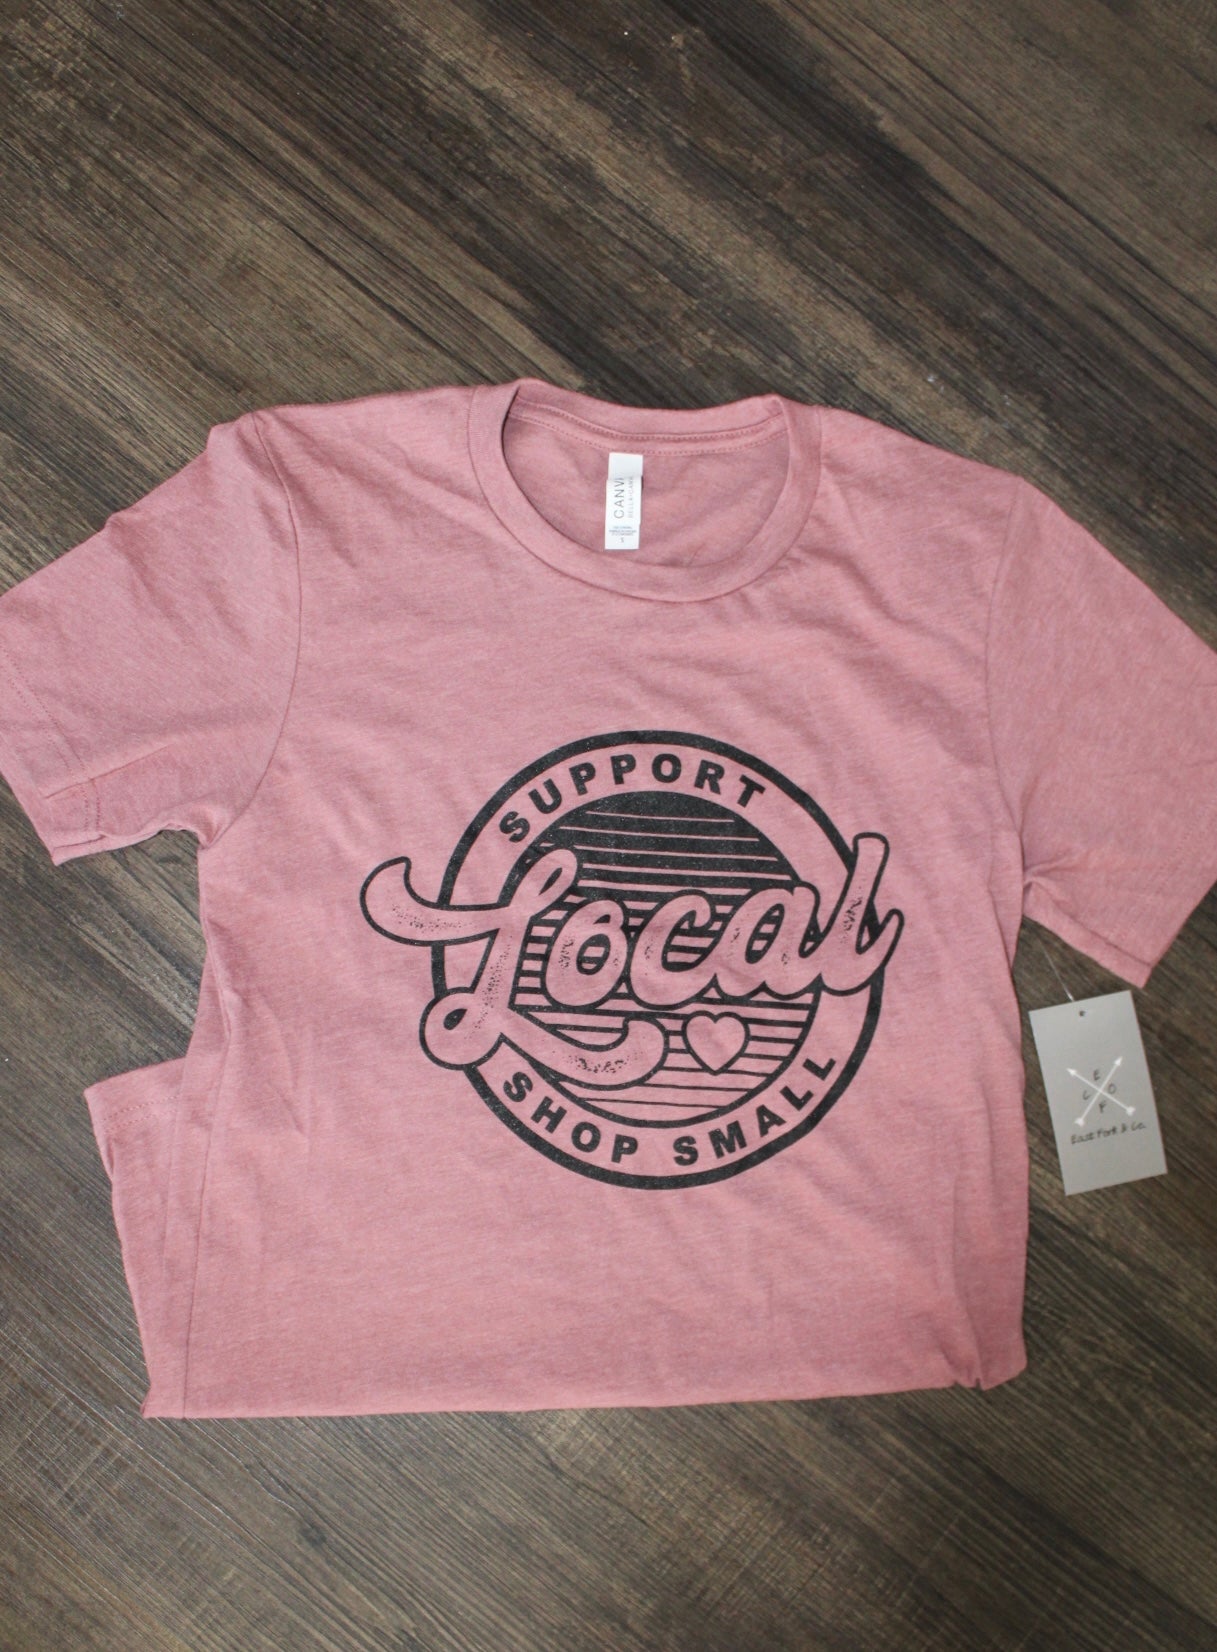 Support Local Shop Small Tee